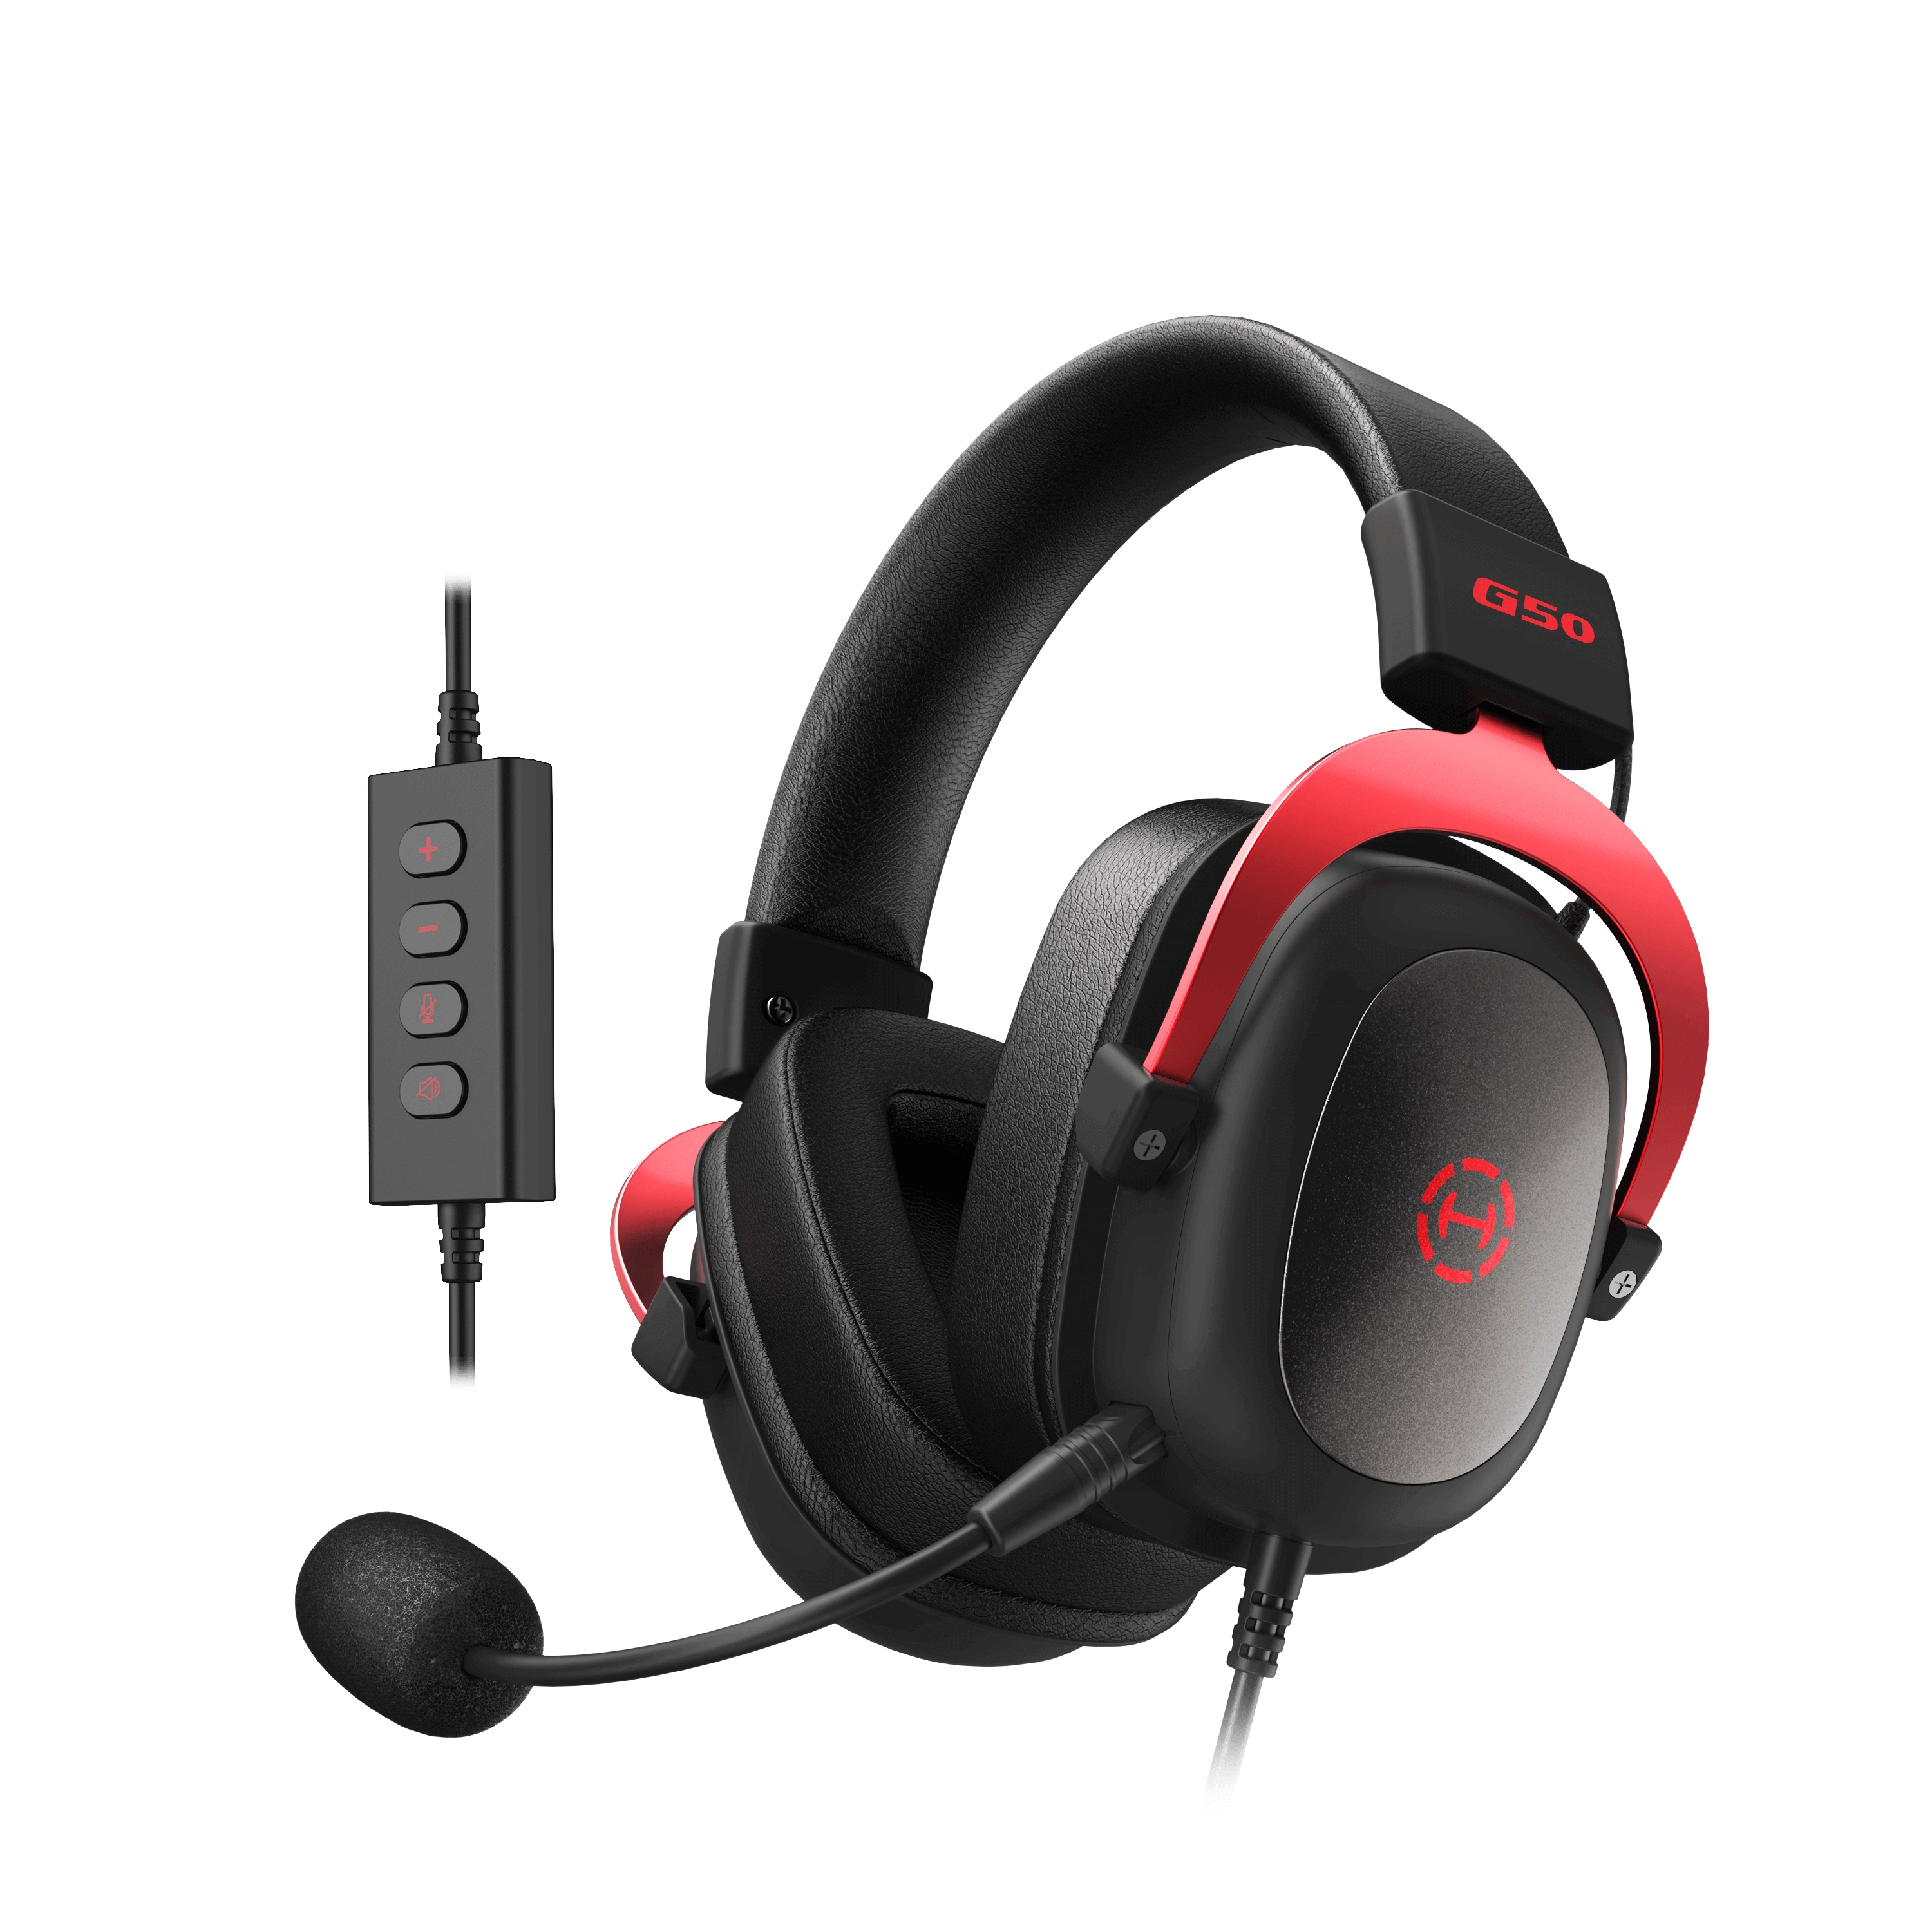 G50 Headset Product Pictures_